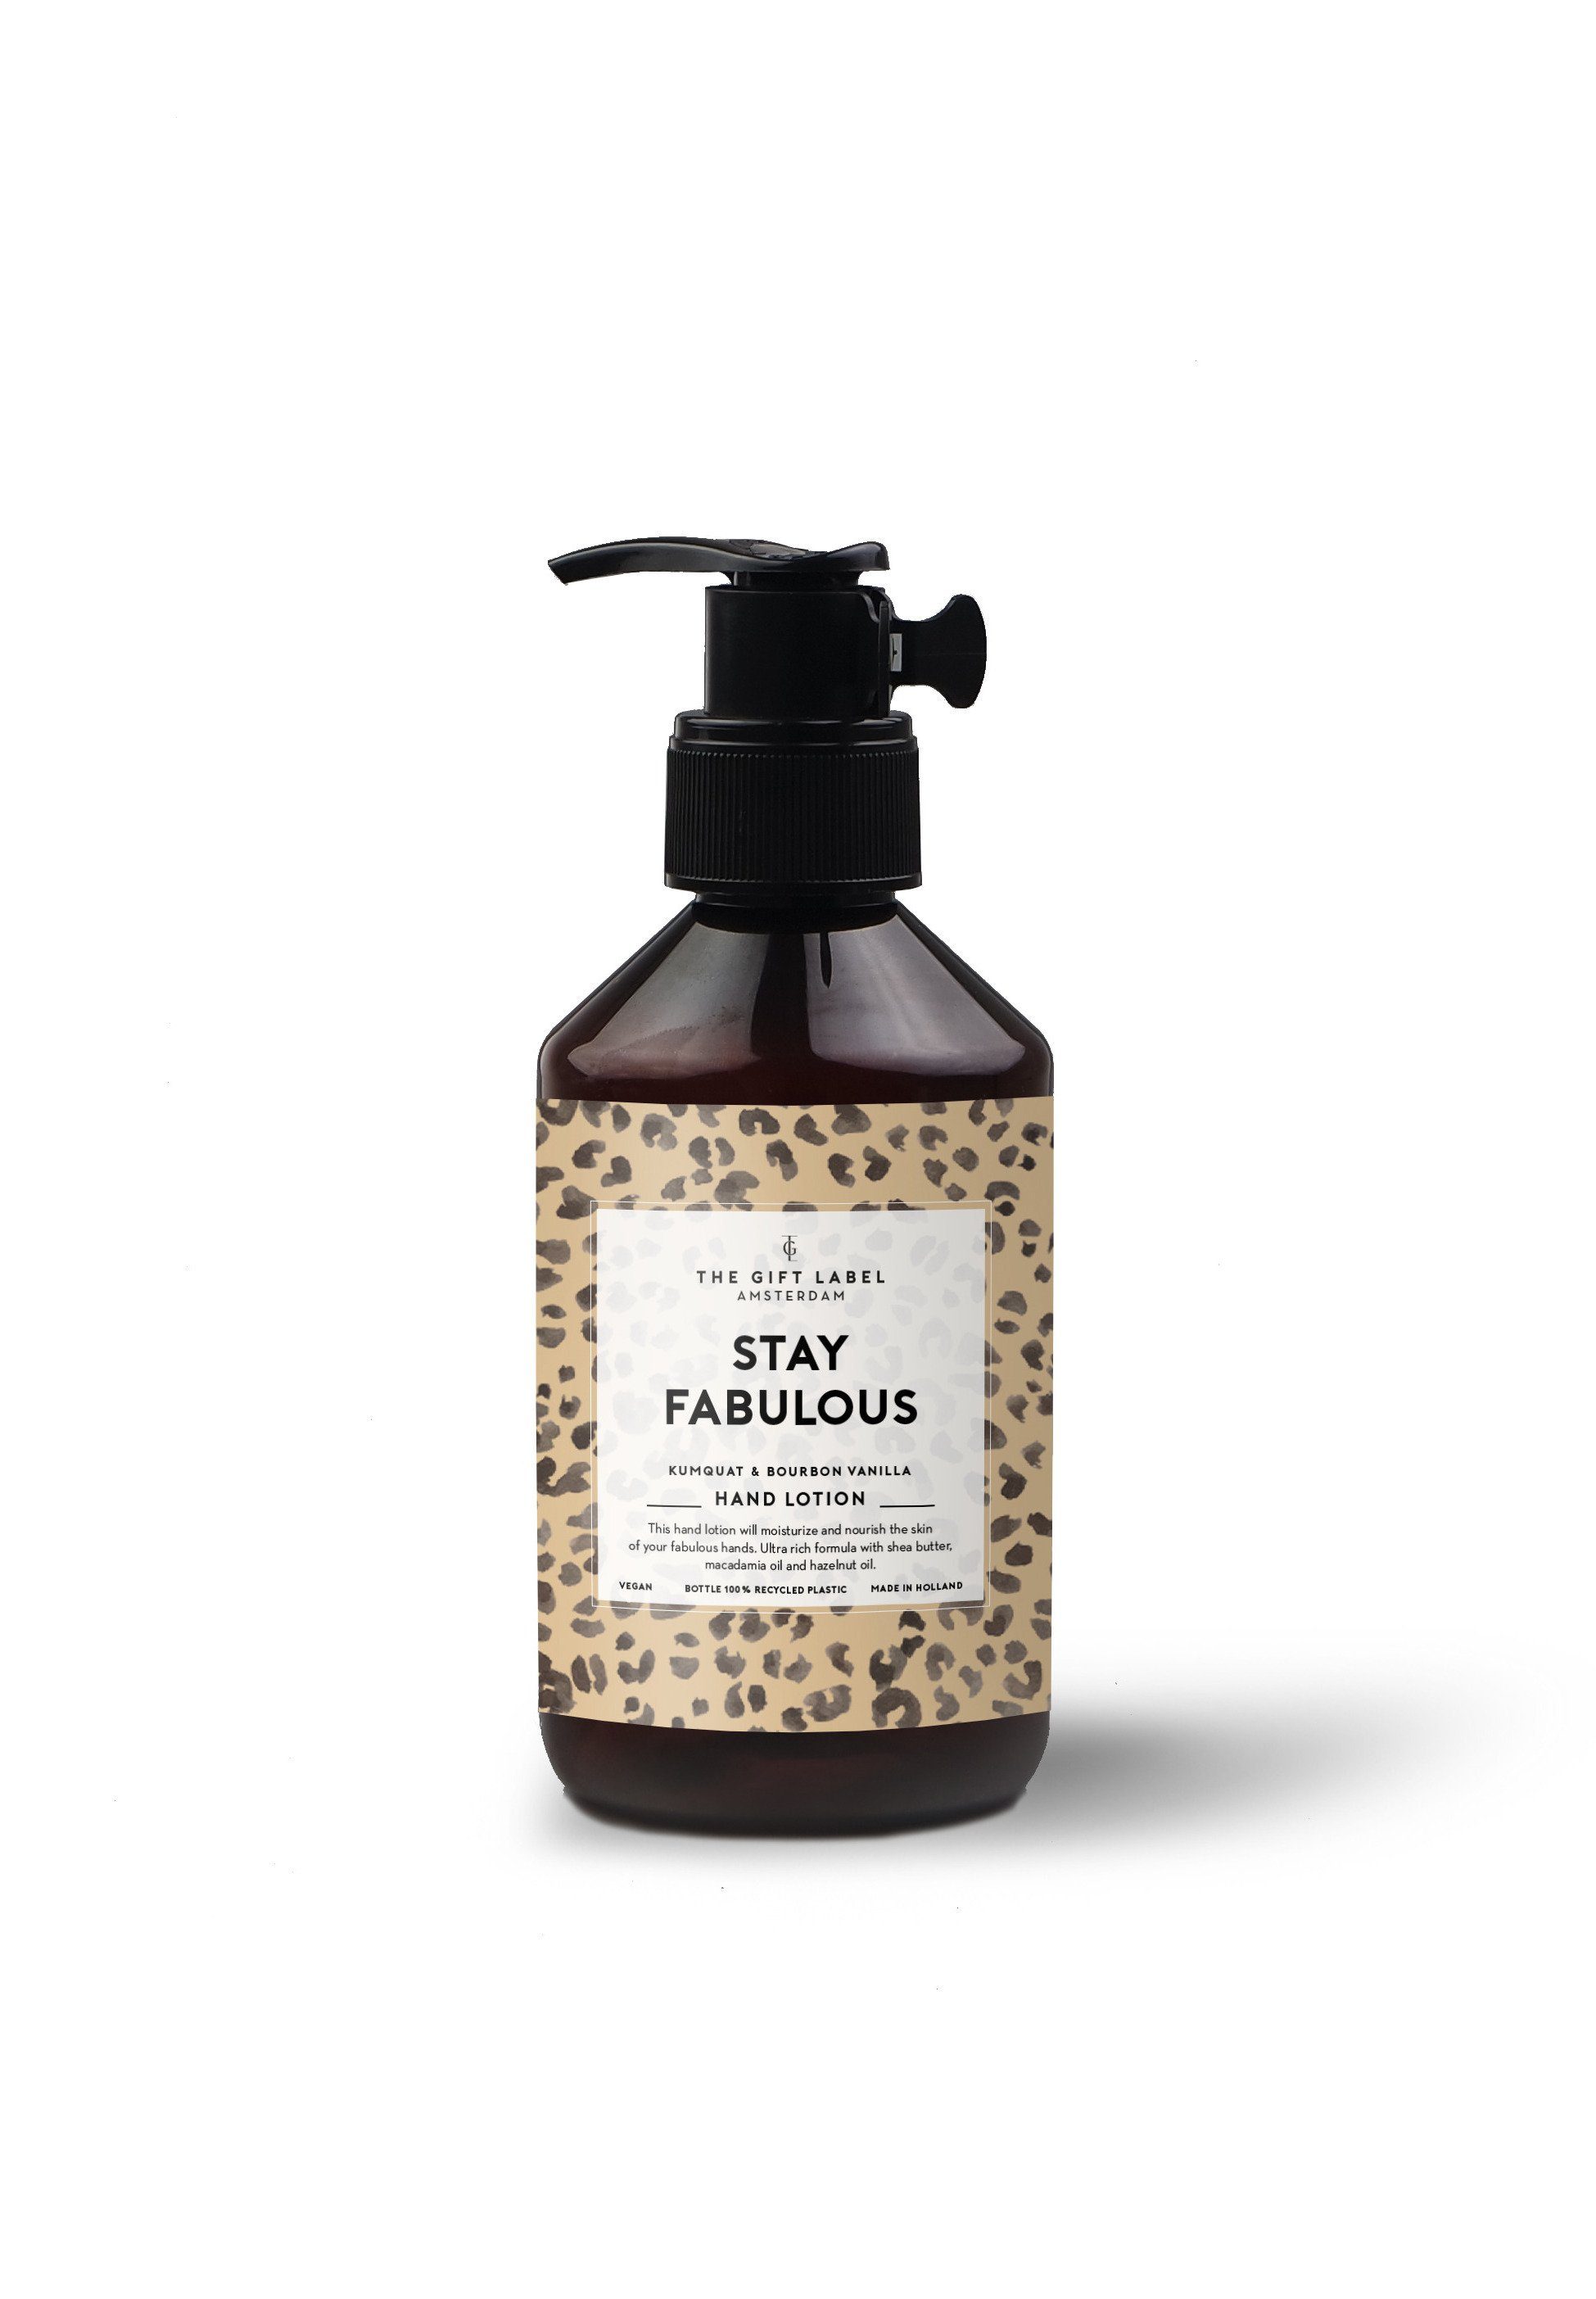 THE GIFT LABEL Handlotion Stay fabulous